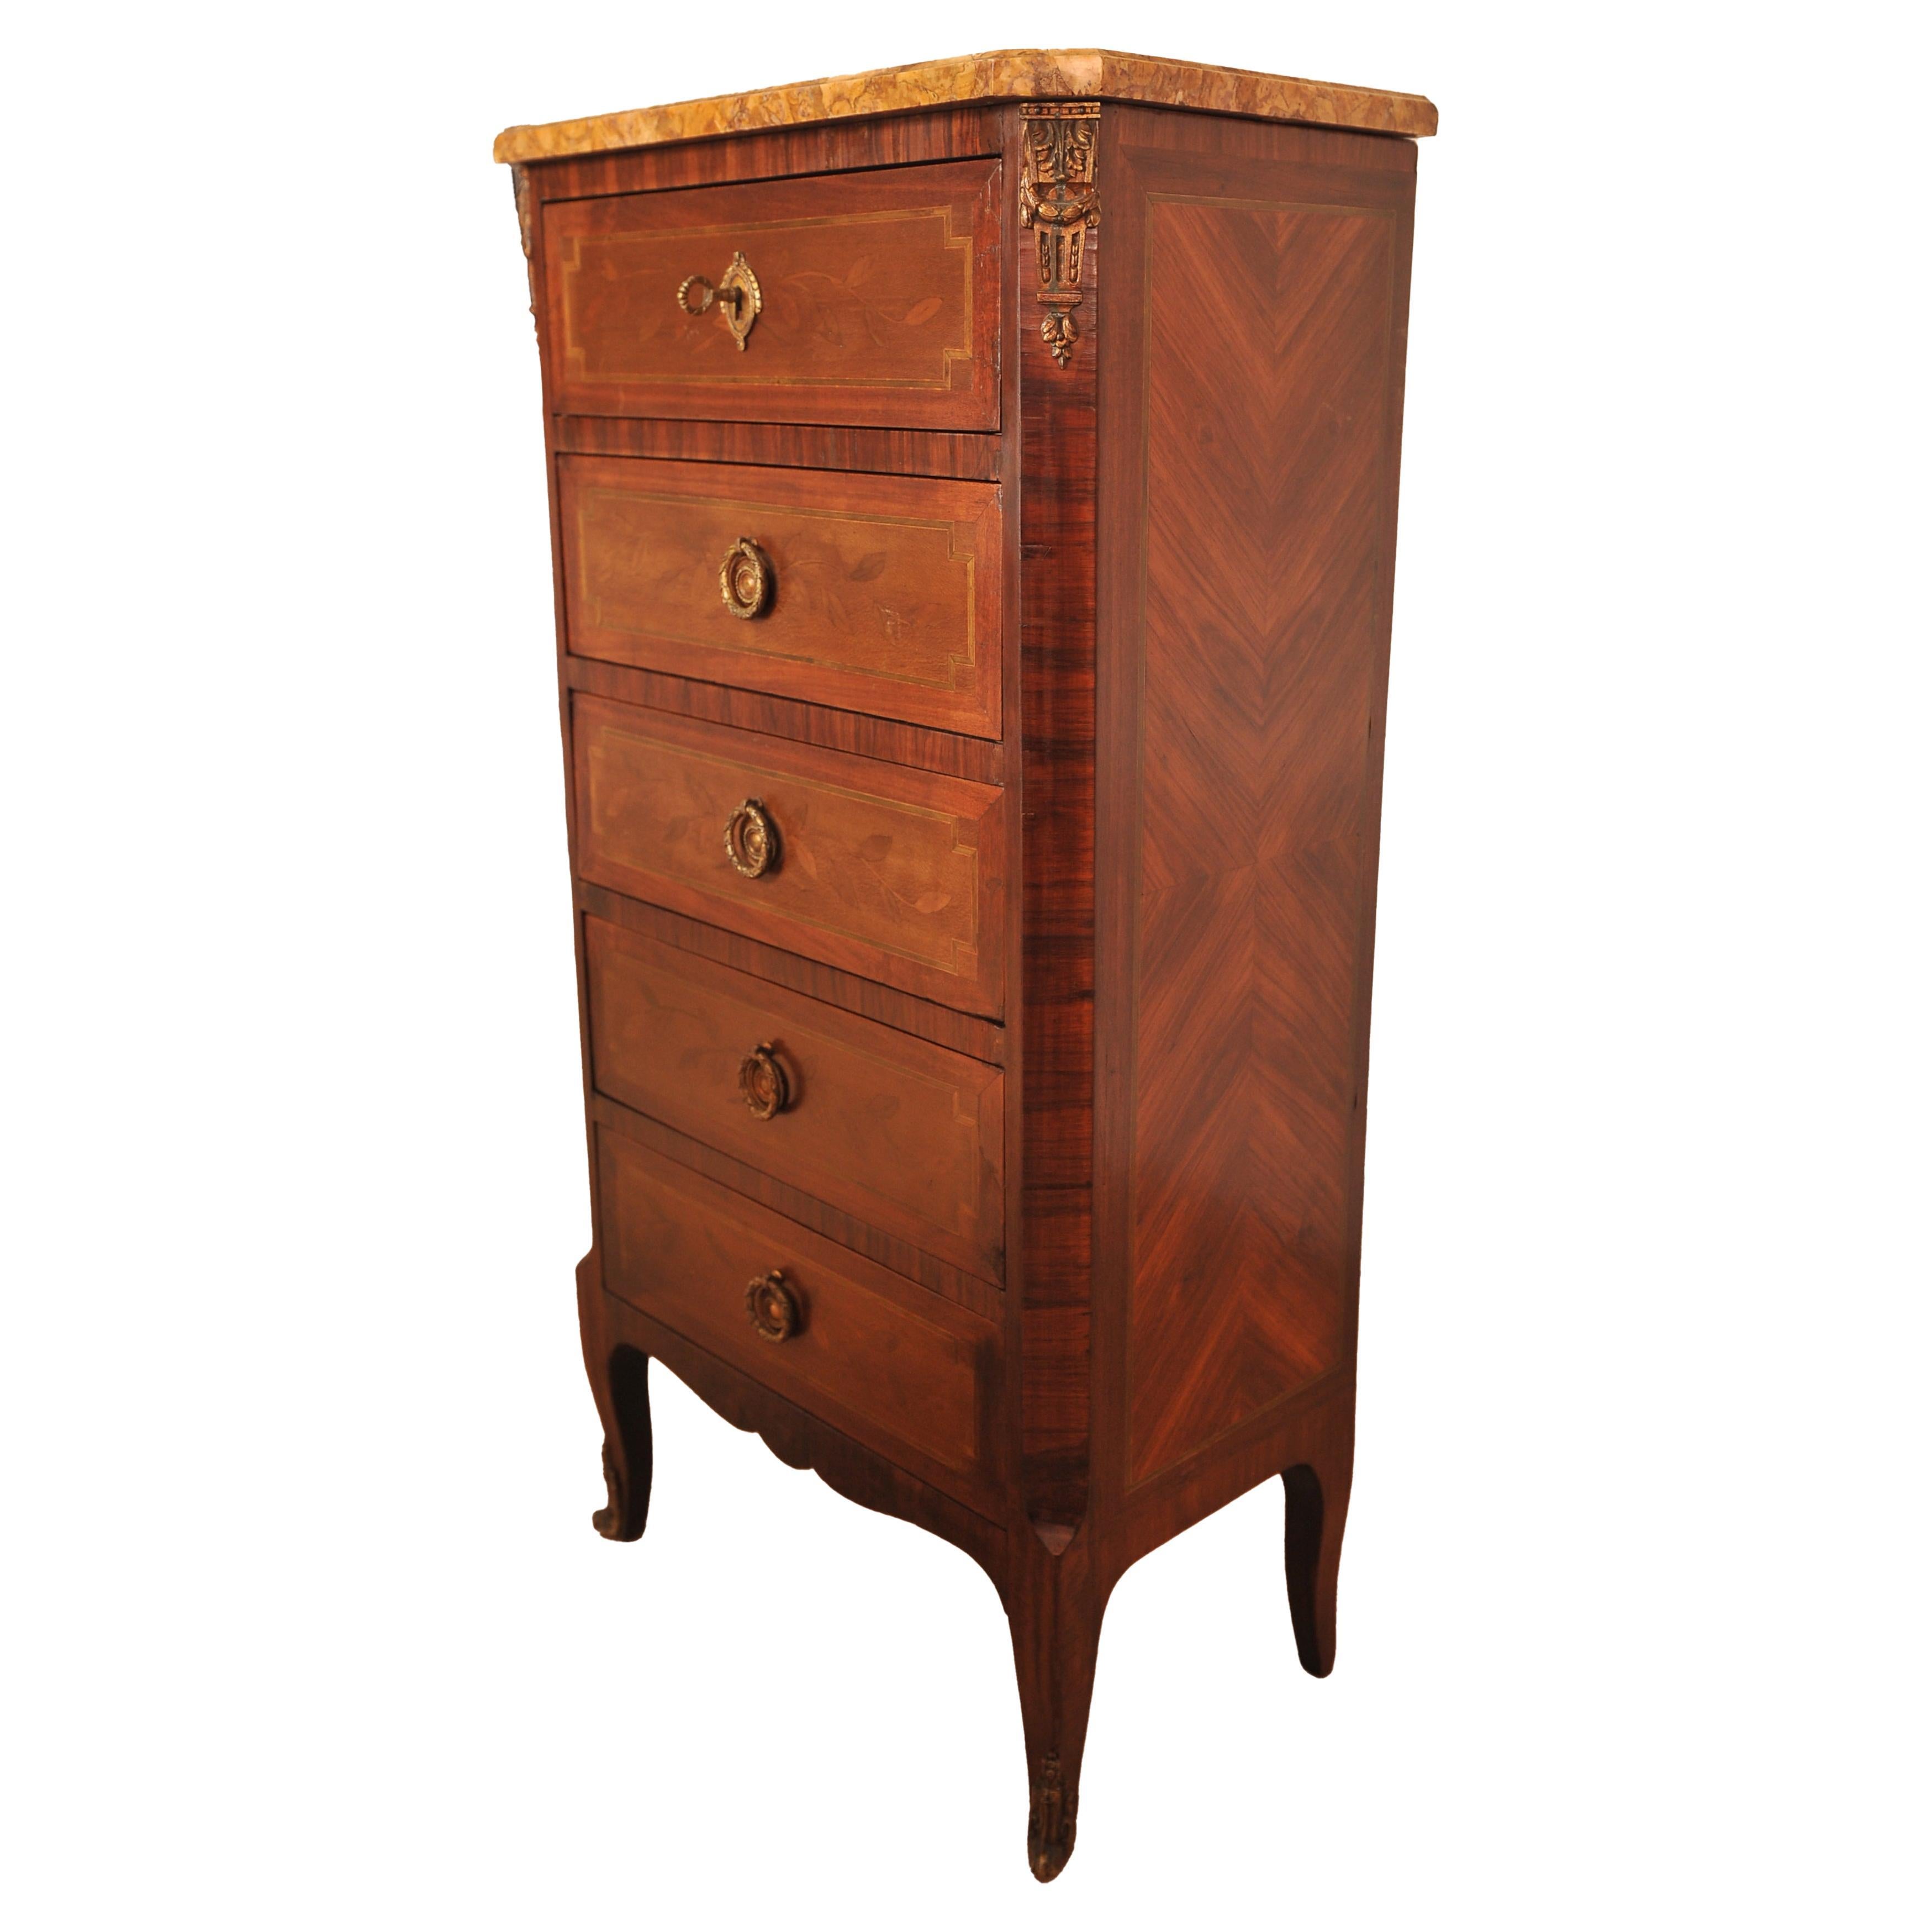 An Elegant 19th Century French Empire Louis XVI  Kingwood Marble Top Chest of Drawers, Cabinet. 5 Short Drawers Inlaid With Entwined Leaves, Brass Ring Handles And Ormolu Mounts.

Inside Drawers Height 10cm Width 40cm Depth 22.5cm
